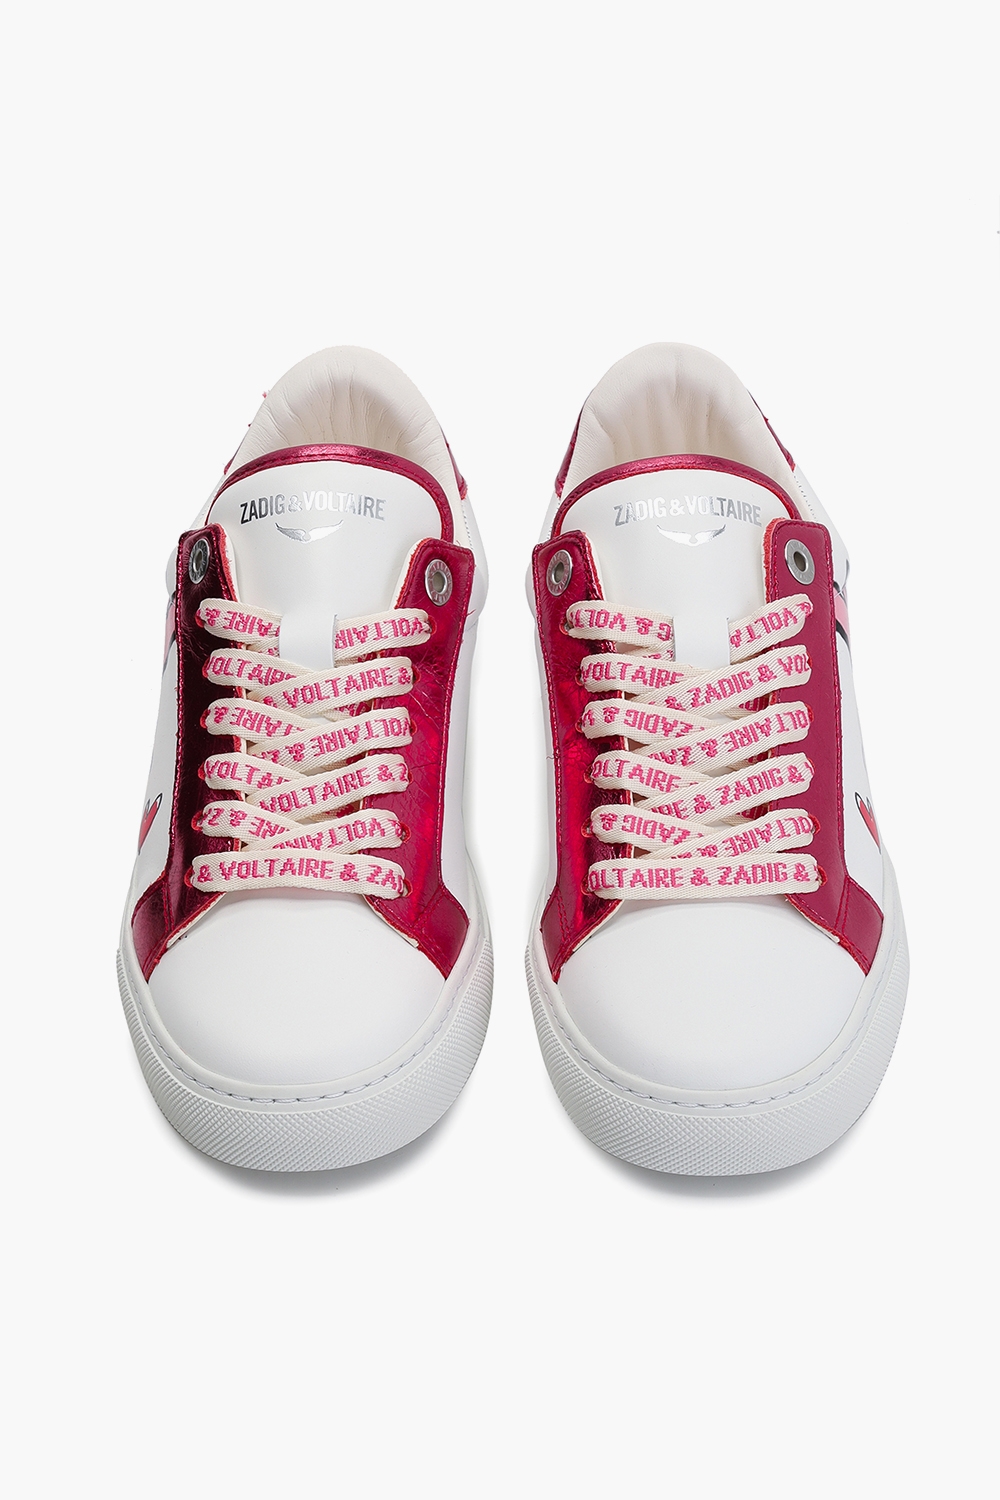 [230mm] ZV1747 Small Heart Sneakers